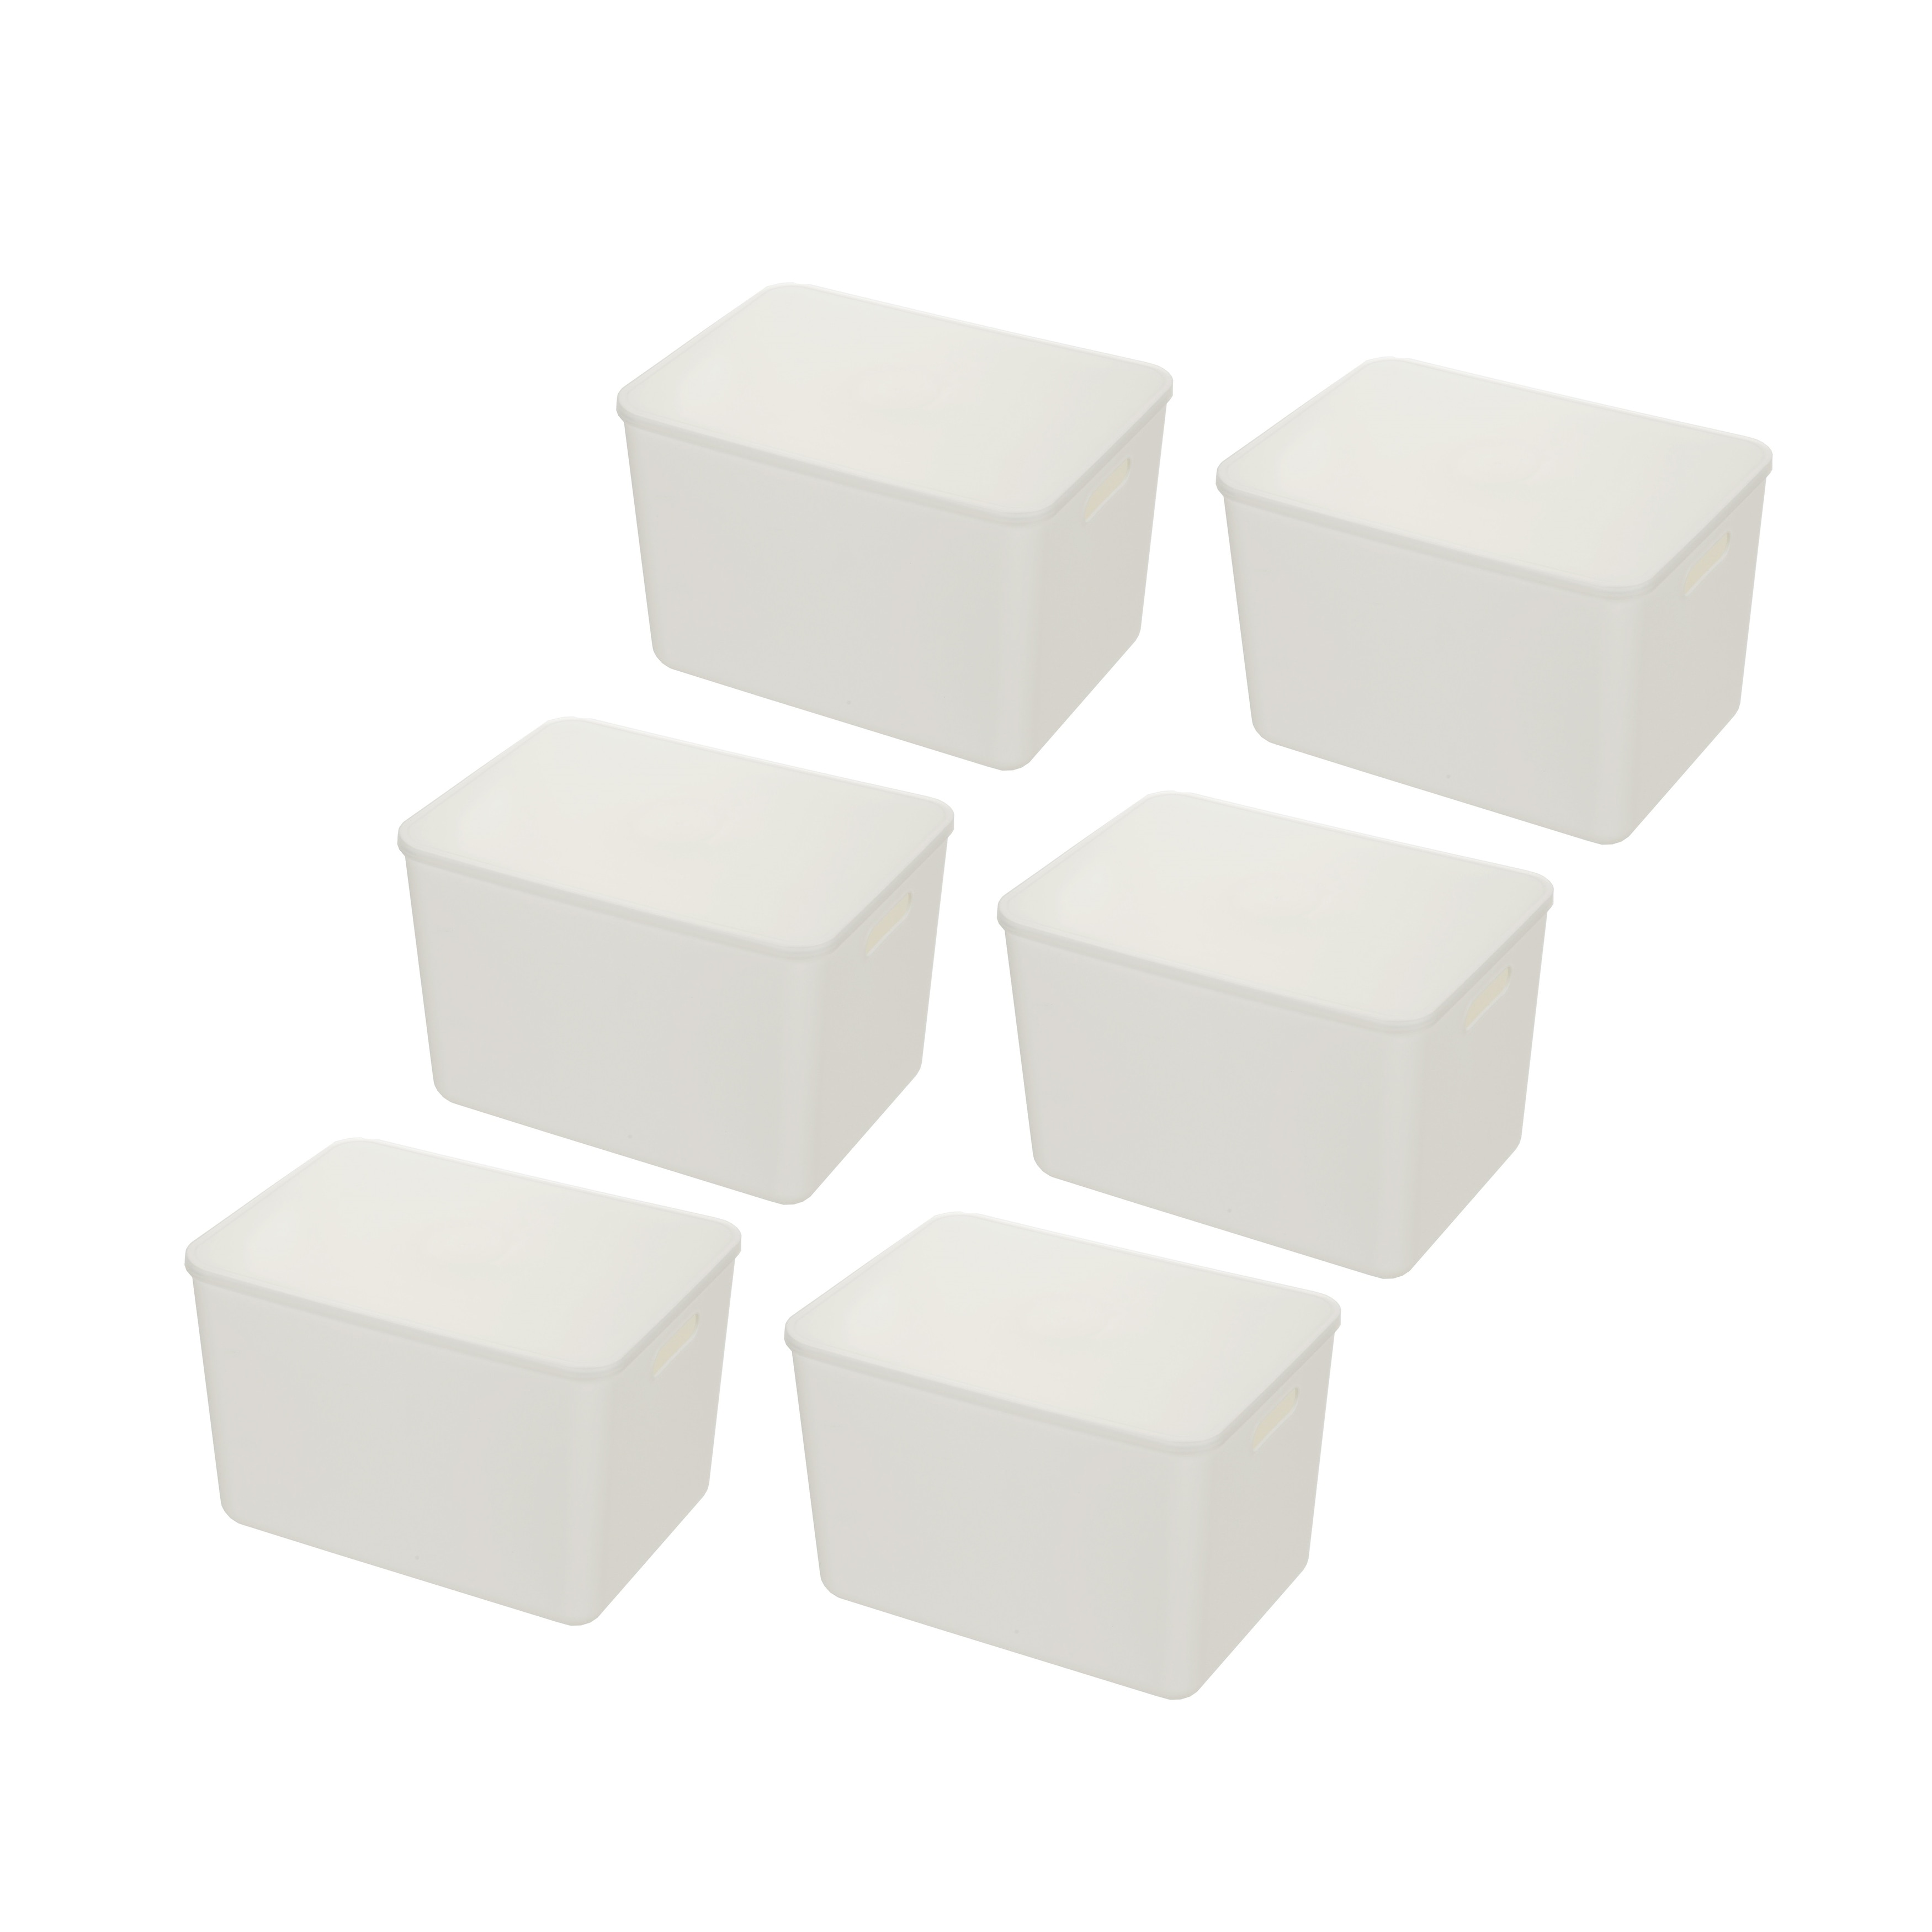 https://ak1.ostkcdn.com/images/products/is/images/direct/eb4f24ba3e8f689ea6b011d2c9ec44ed25cc53a1/YBM-Home-Plastic-Storage-Bins-with-Lids-for-Organizing-Small-Household-Items%2C-Multipurpose-for-Classroom%2C-Drawers%2C-Desktop.jpg